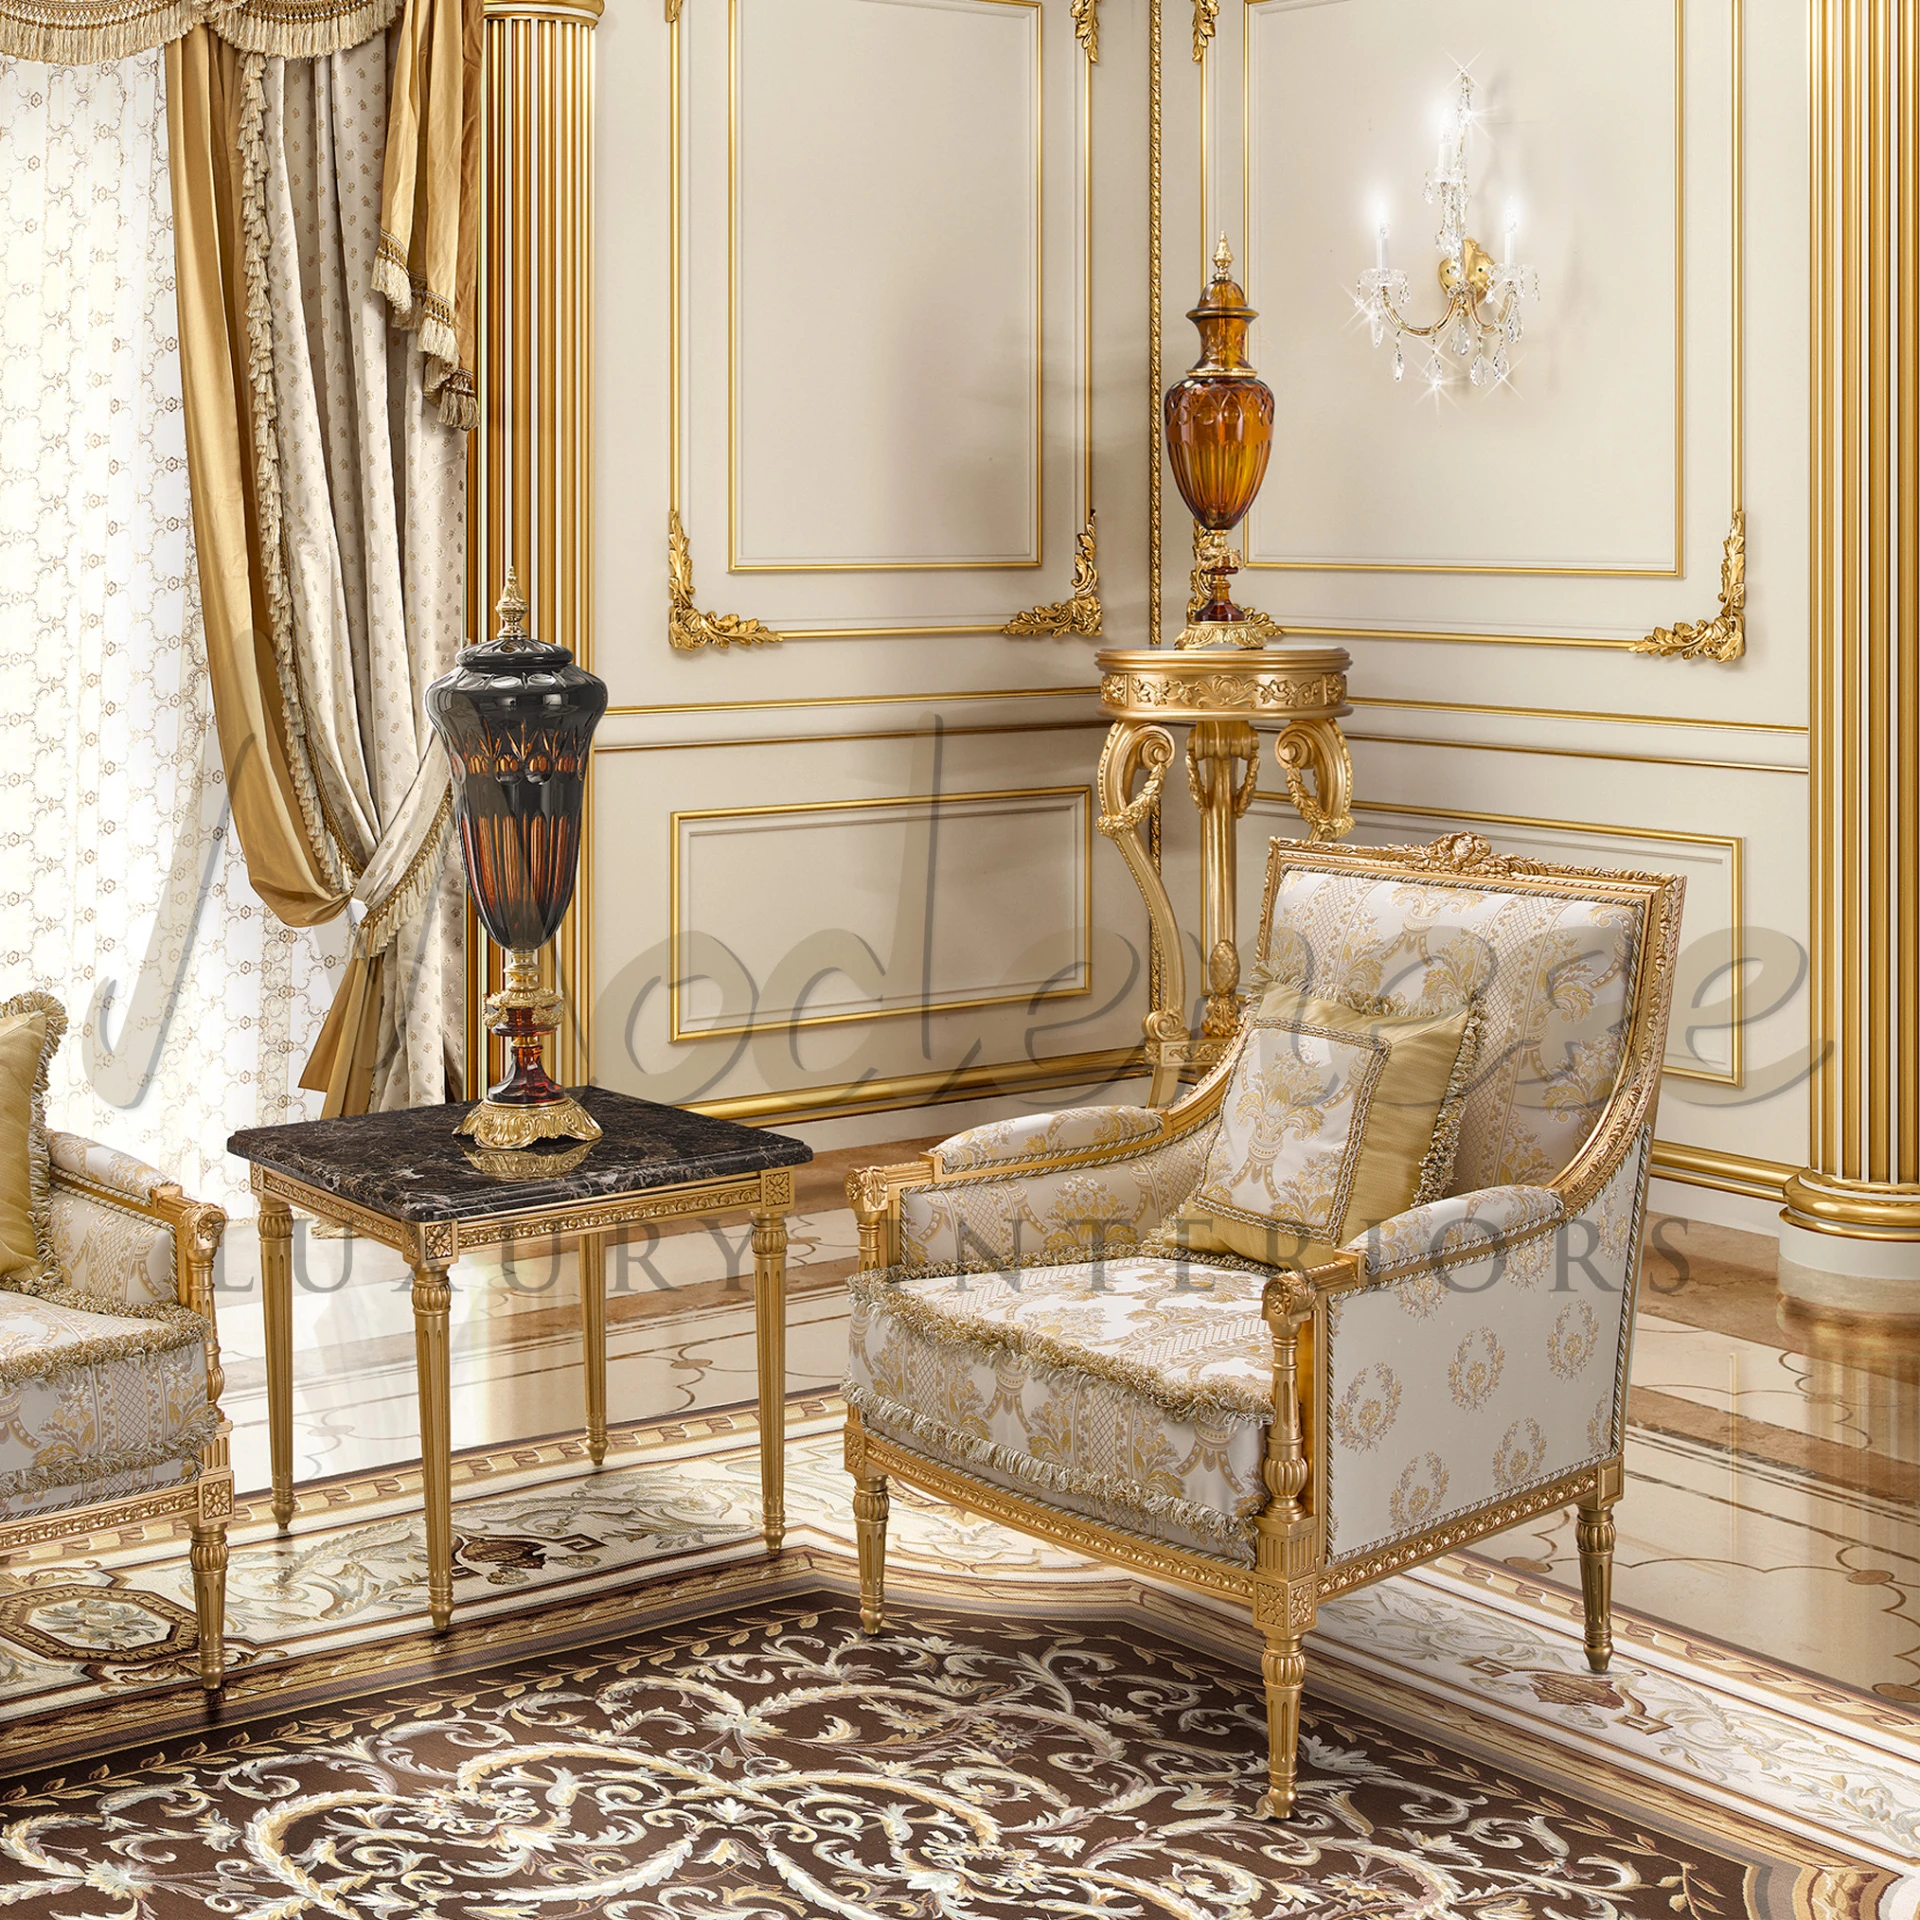 Elegant Empire Armchair in baroque design, combining luxury fabric and Italian upholstery for sophisticated home decor.